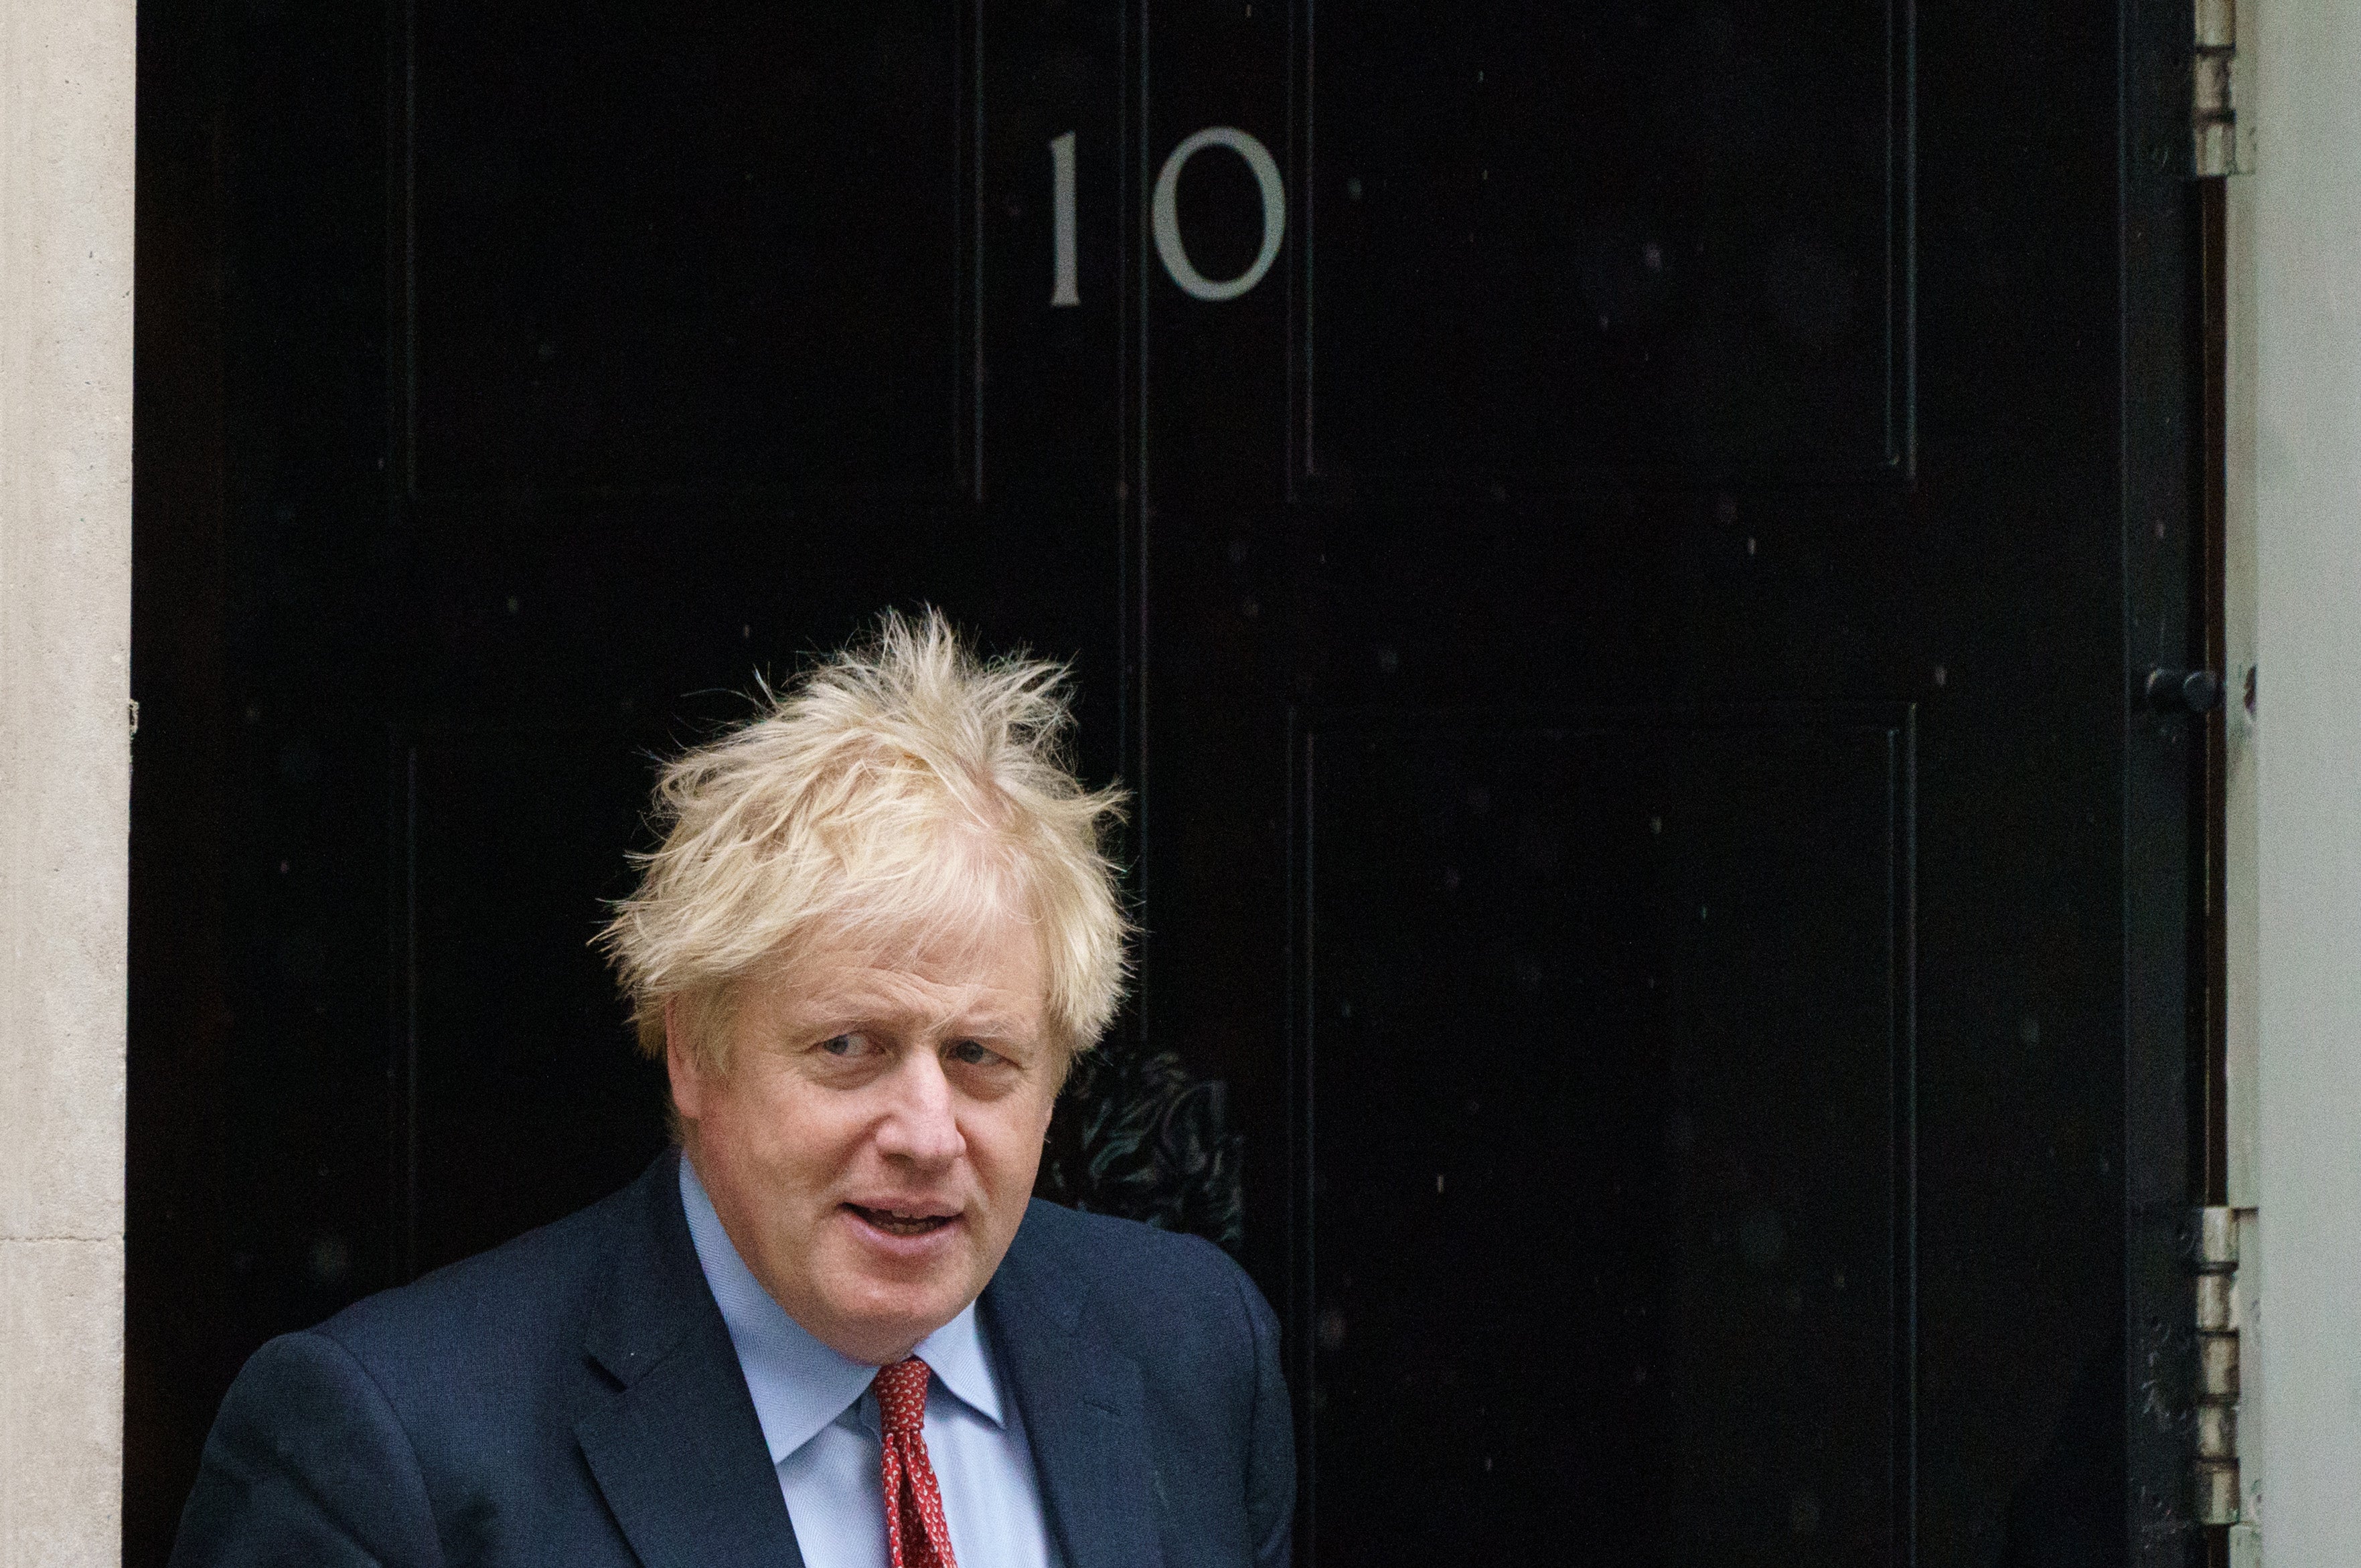 Prime Minister Boris Johnson at 10 Downing Street, London, as Mr Johnson overhauls his Downing Street operation following the conclusion of a four-month Metropolitan Police inquiry into lockdown-busting parties at the top of Government during the pandemic. Picture date: Friday May 20, 2022.